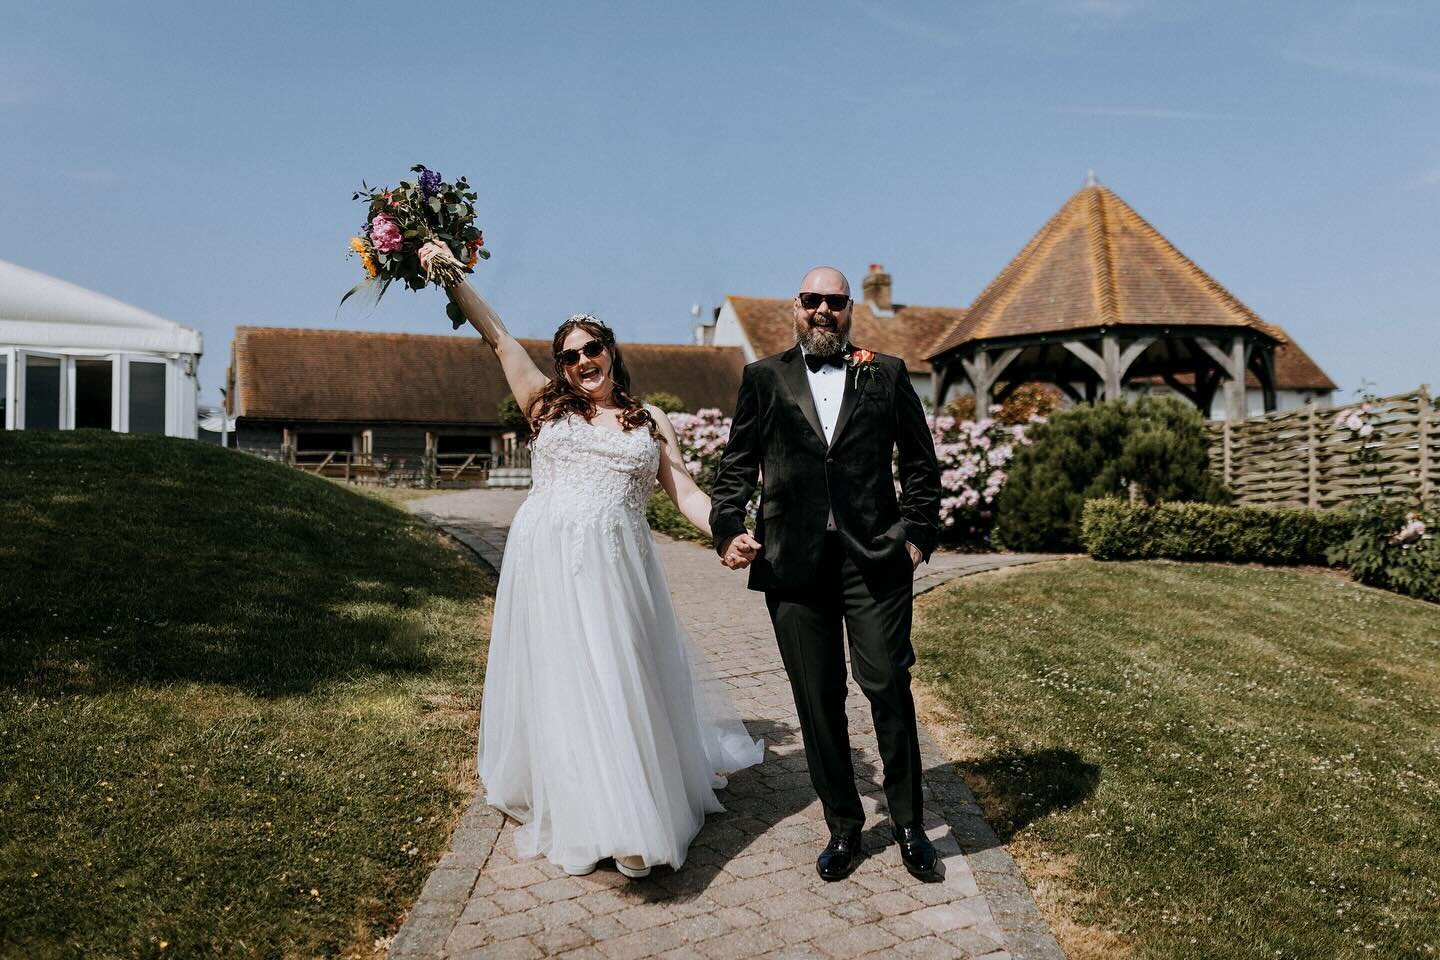 Here we go, striding into wedding season! So many stories will be told over the coming months, exciting times lay ahead ⚡️⚡️⚡️
@theferryhouseweddings